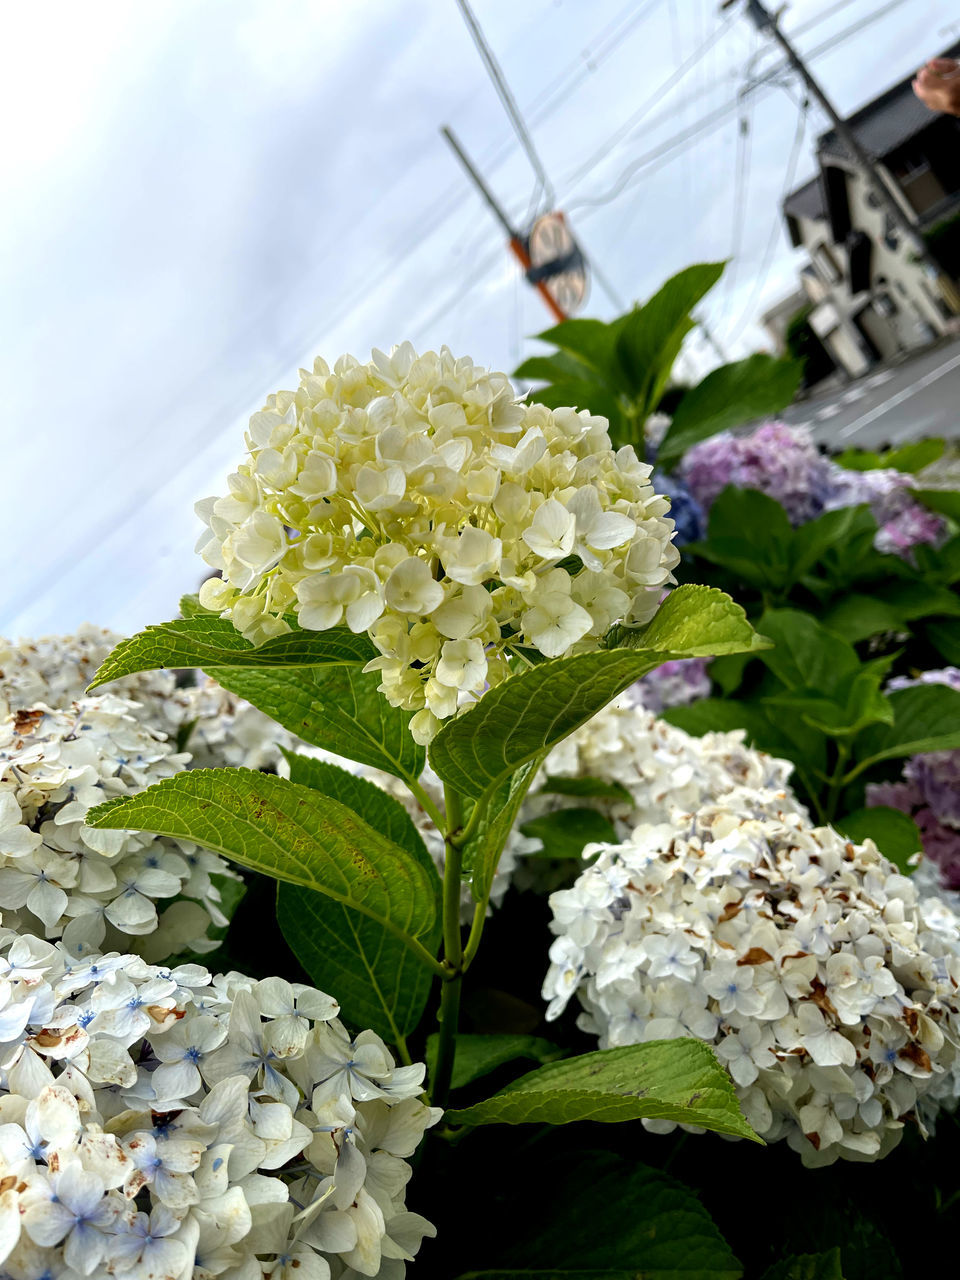 CLOSE-UP OF FRESH WHITE FLOWERING PLANTS